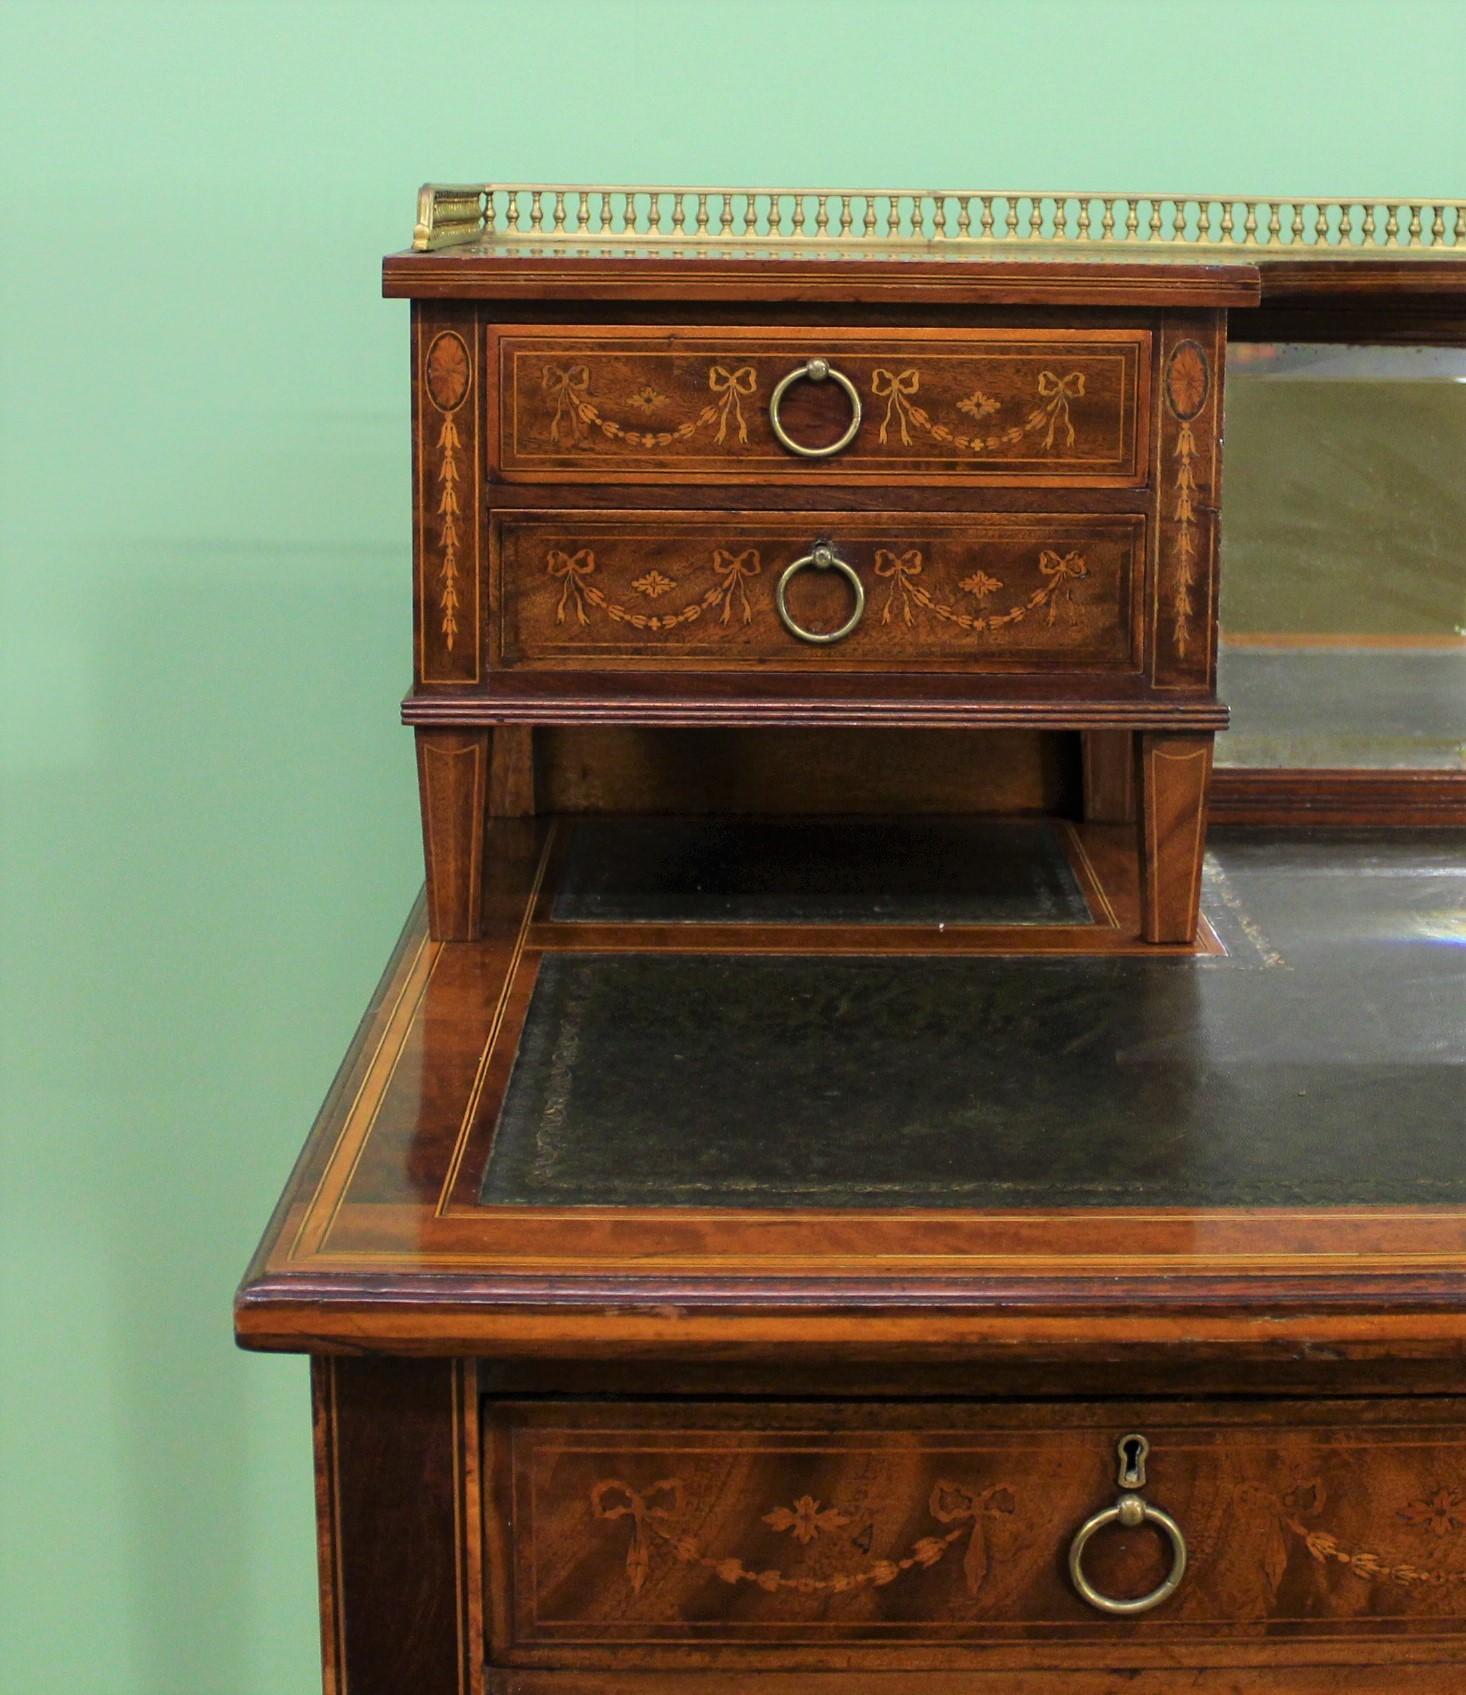 A fine quality late Victorian period inlaid mahogany writing desk. Well-constructed in solid mahogany with attractive mahogany veneers. Decorated throughout with inlaid stringing and satinwood banding. Further embellished with intricate inlaid